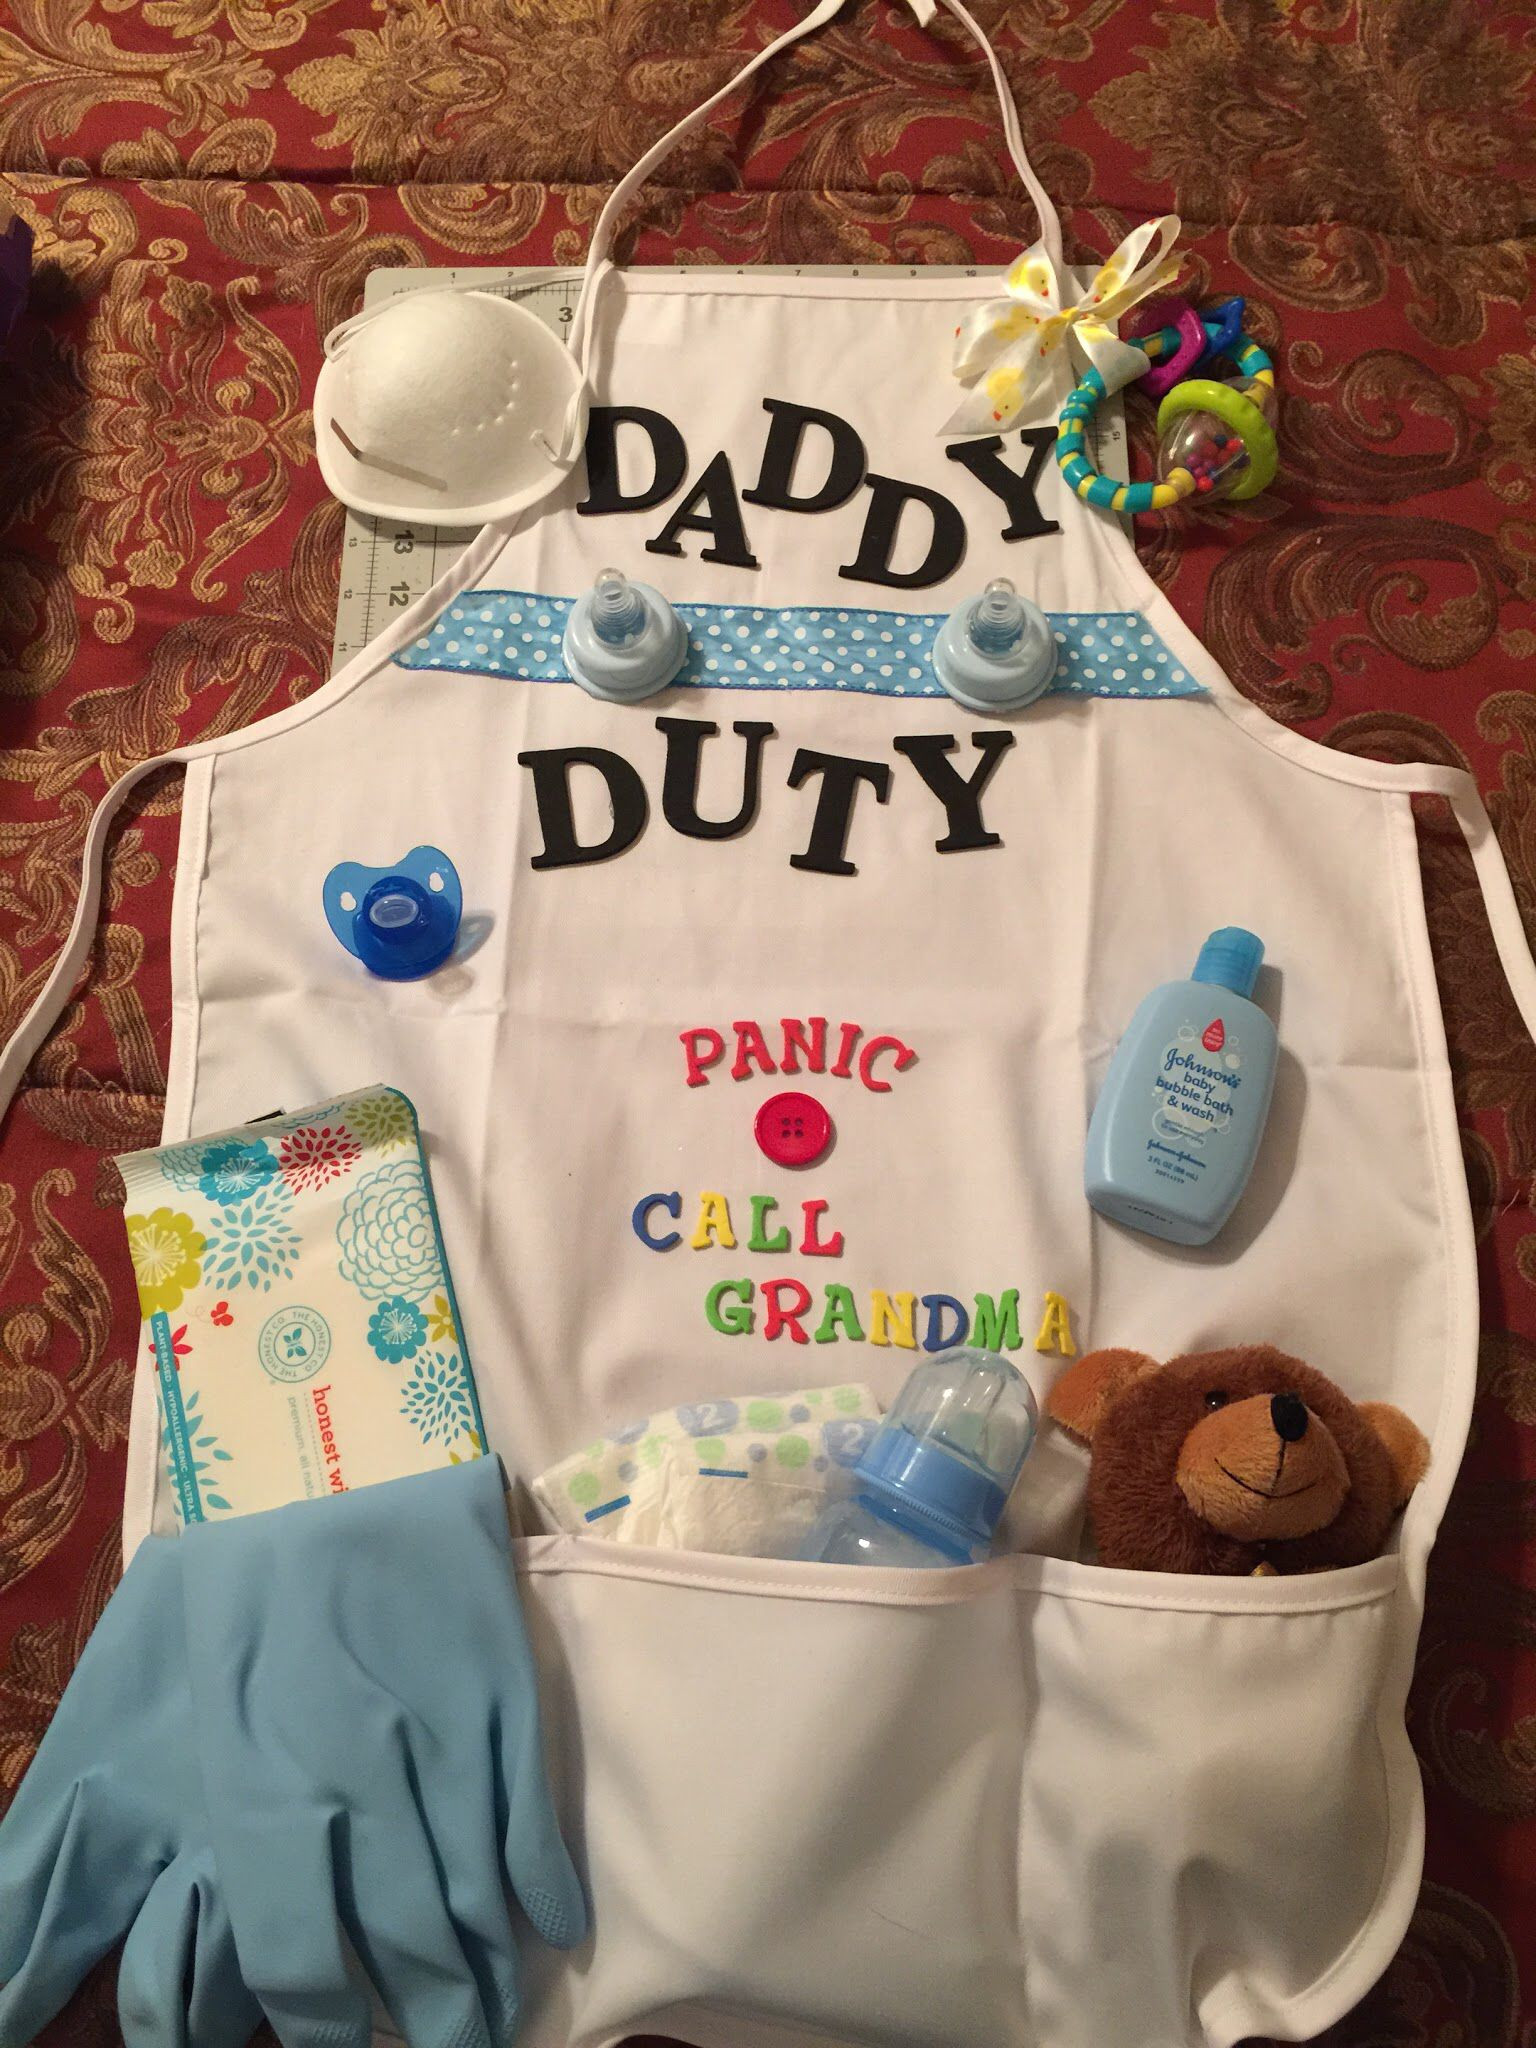 Baby Shower Gift Ideas For Dads
 New Dad Diaper Duty apron